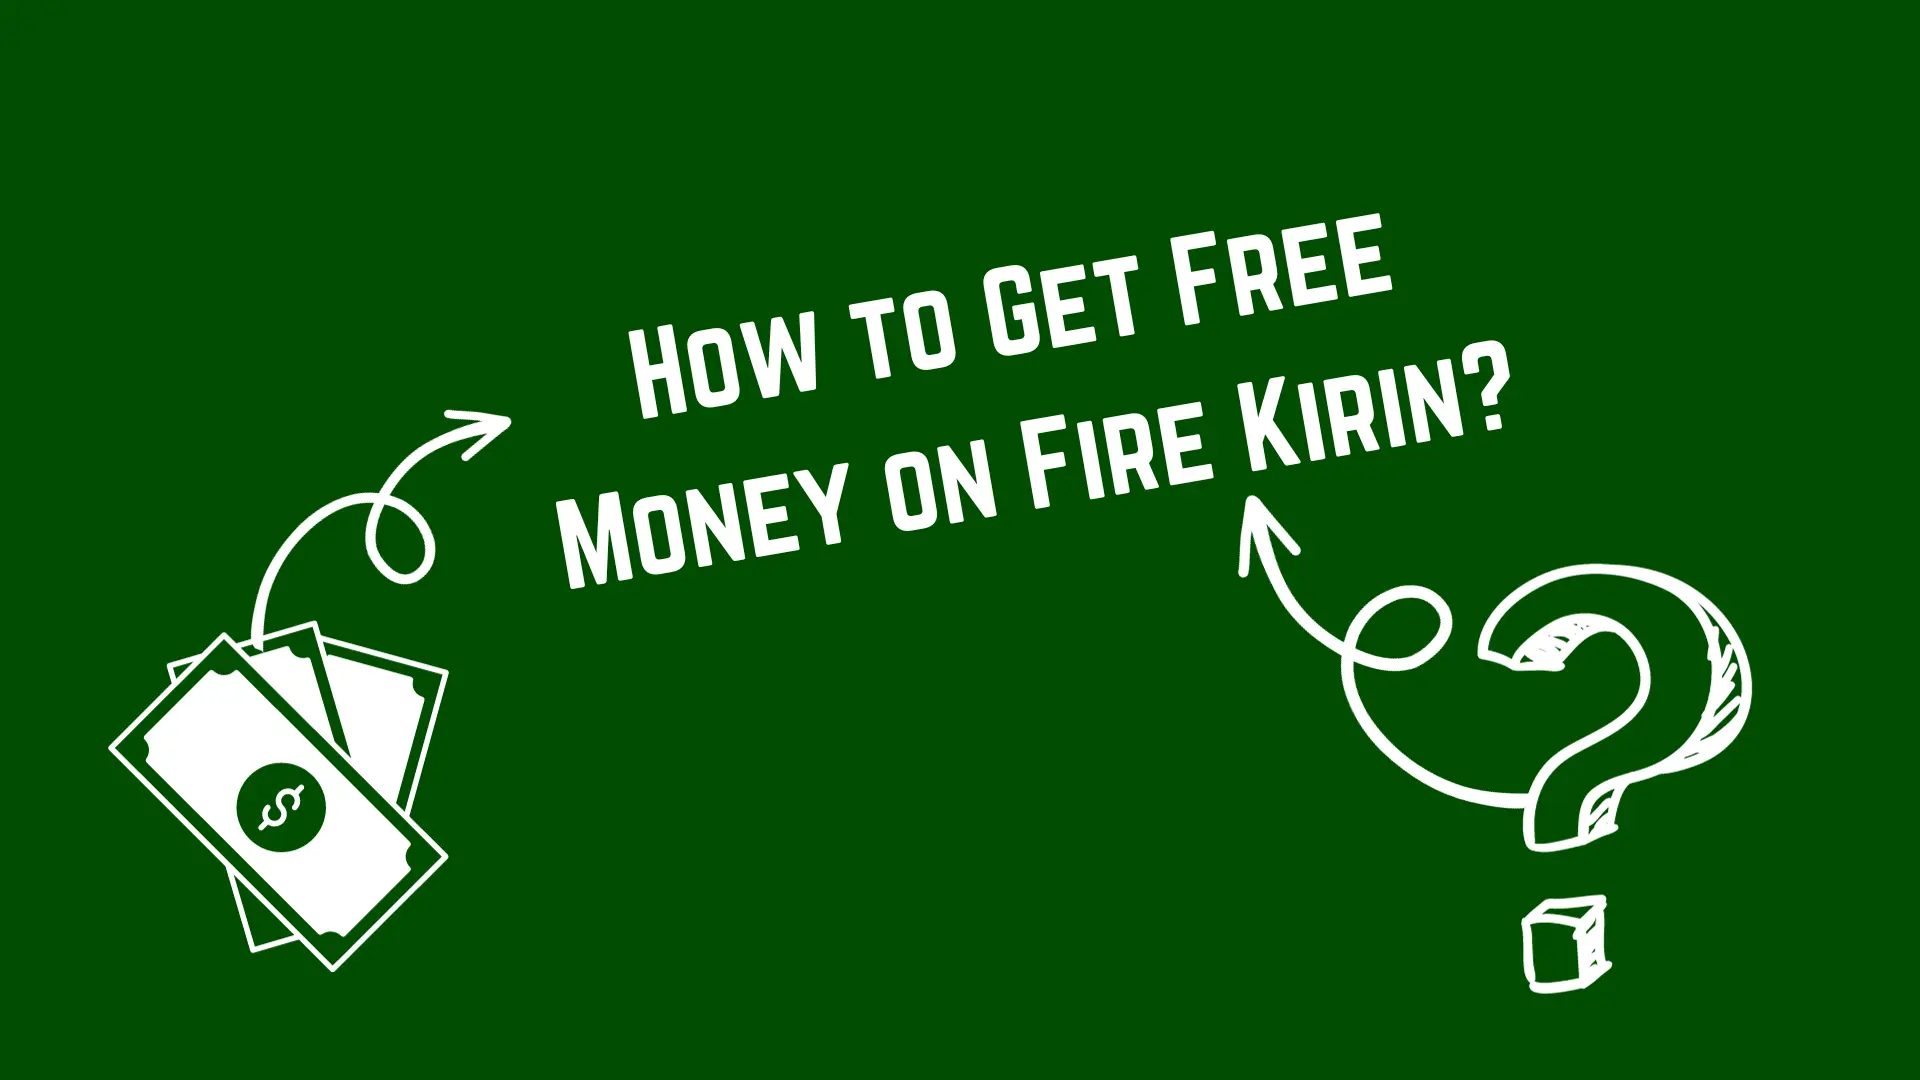 How to Get Free Money on Fire Kirin